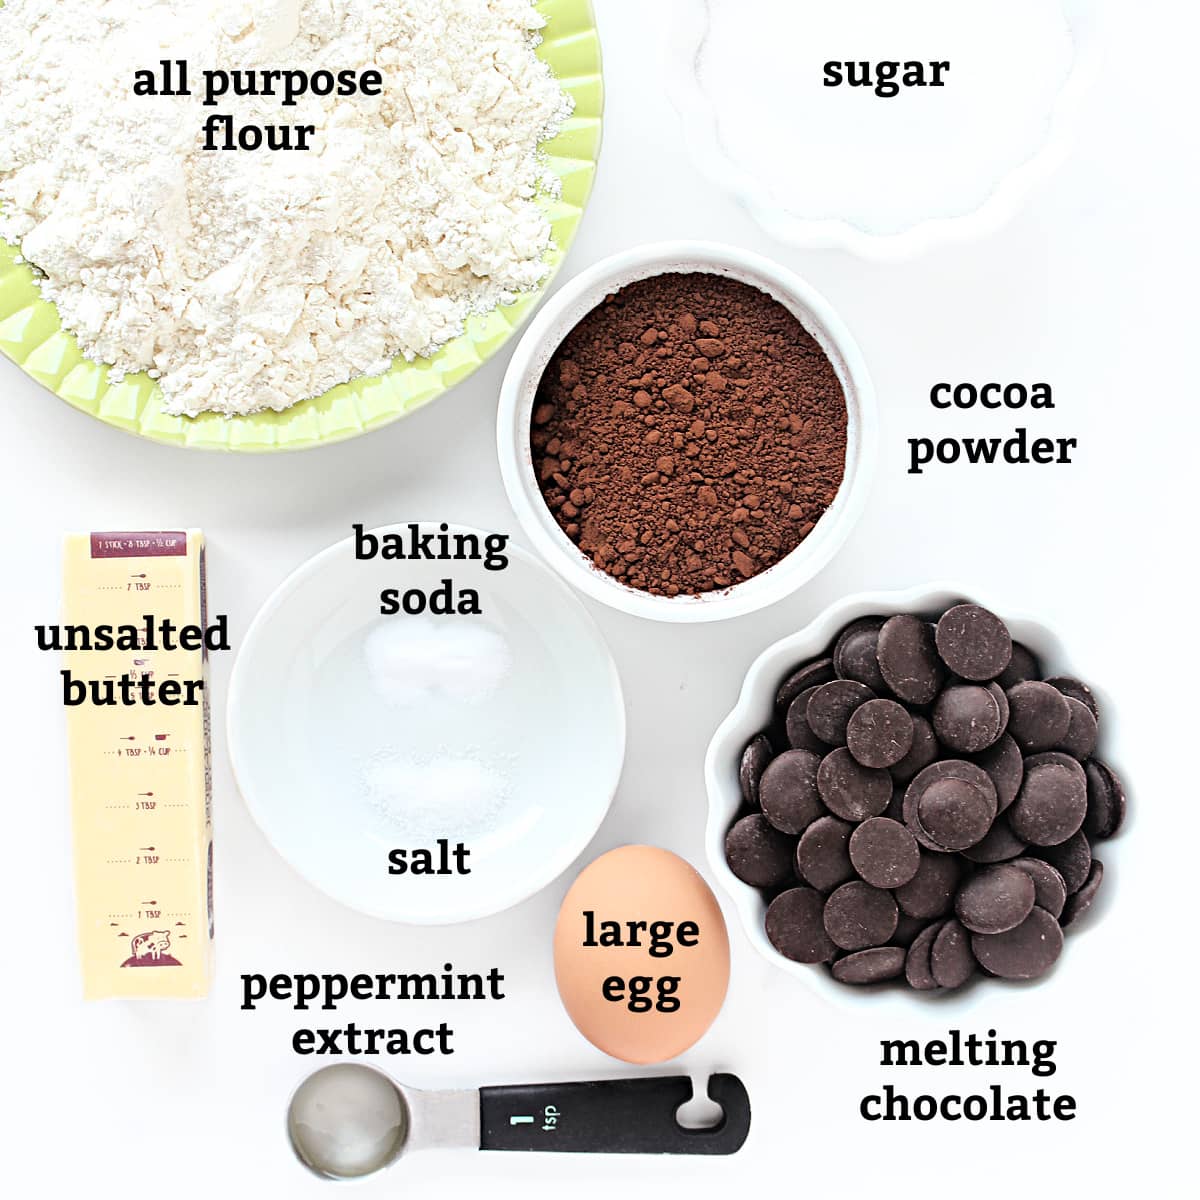 Ingredients: flour, sugar, unsalted butter, baking soda, salt, cocoa powder, egg, peppermint extract, melting chocolate.